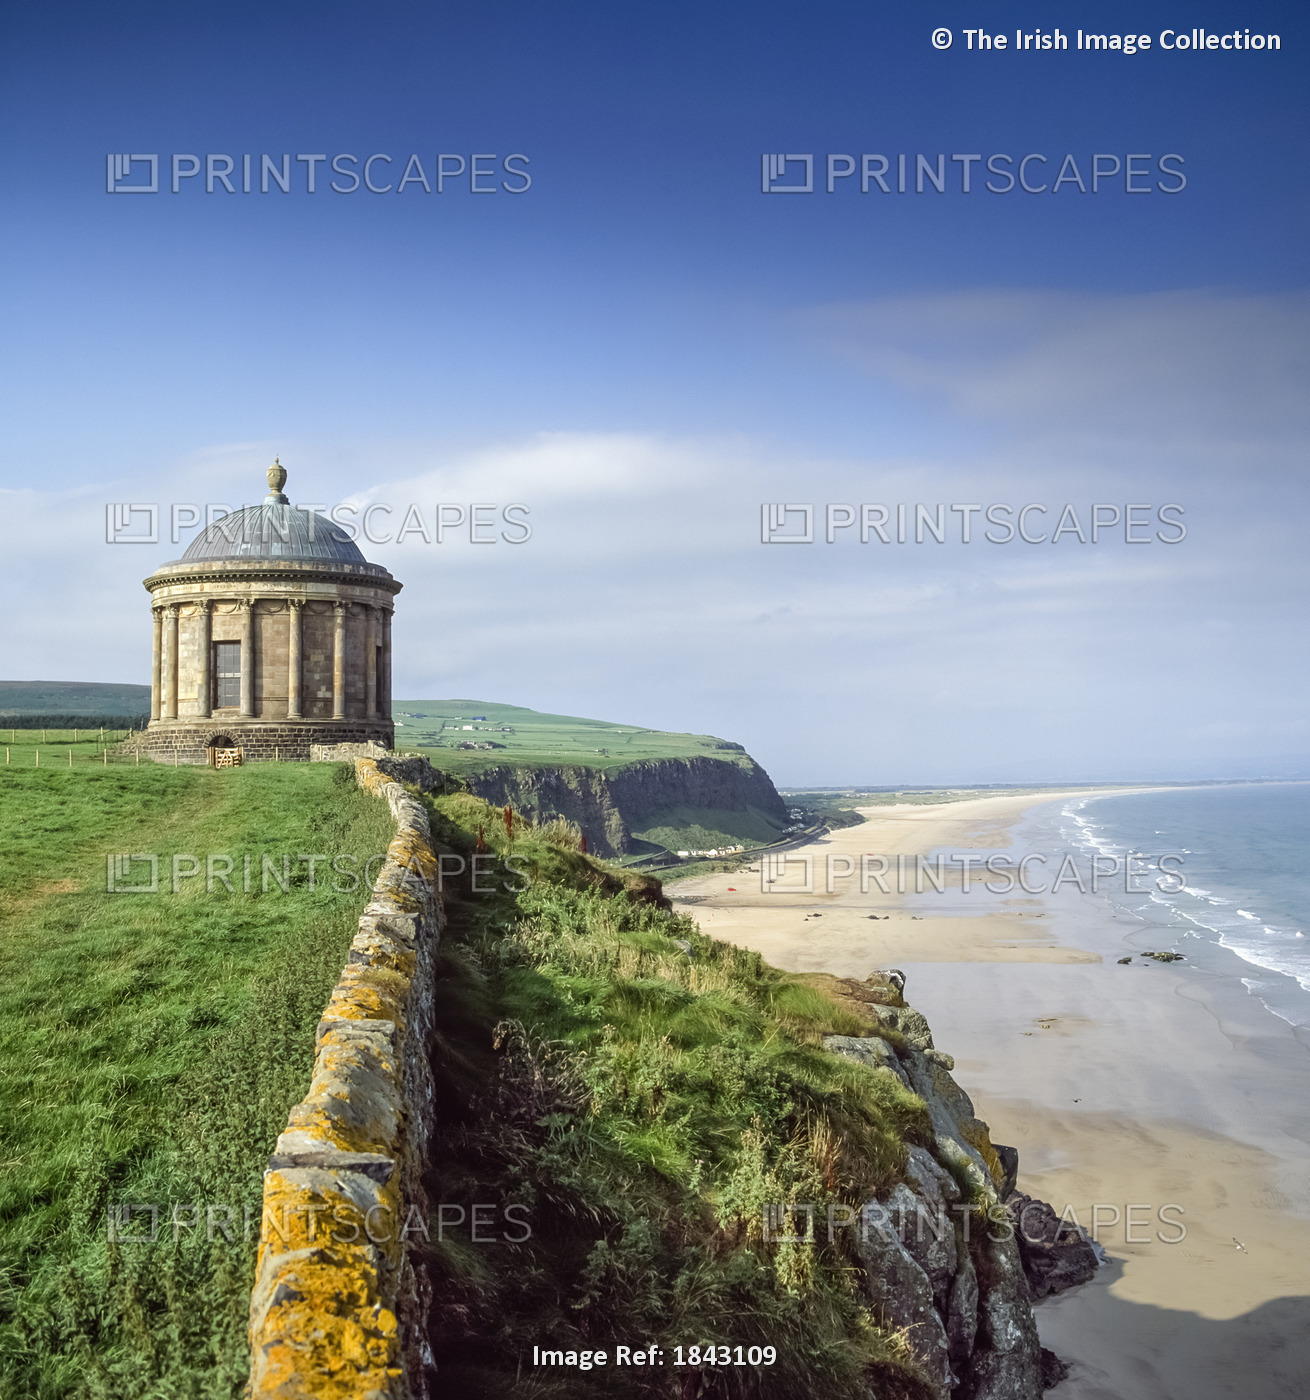 Mussenden Temple,Co Derry,Northern Ireland; Building At The Edge Of Cliff